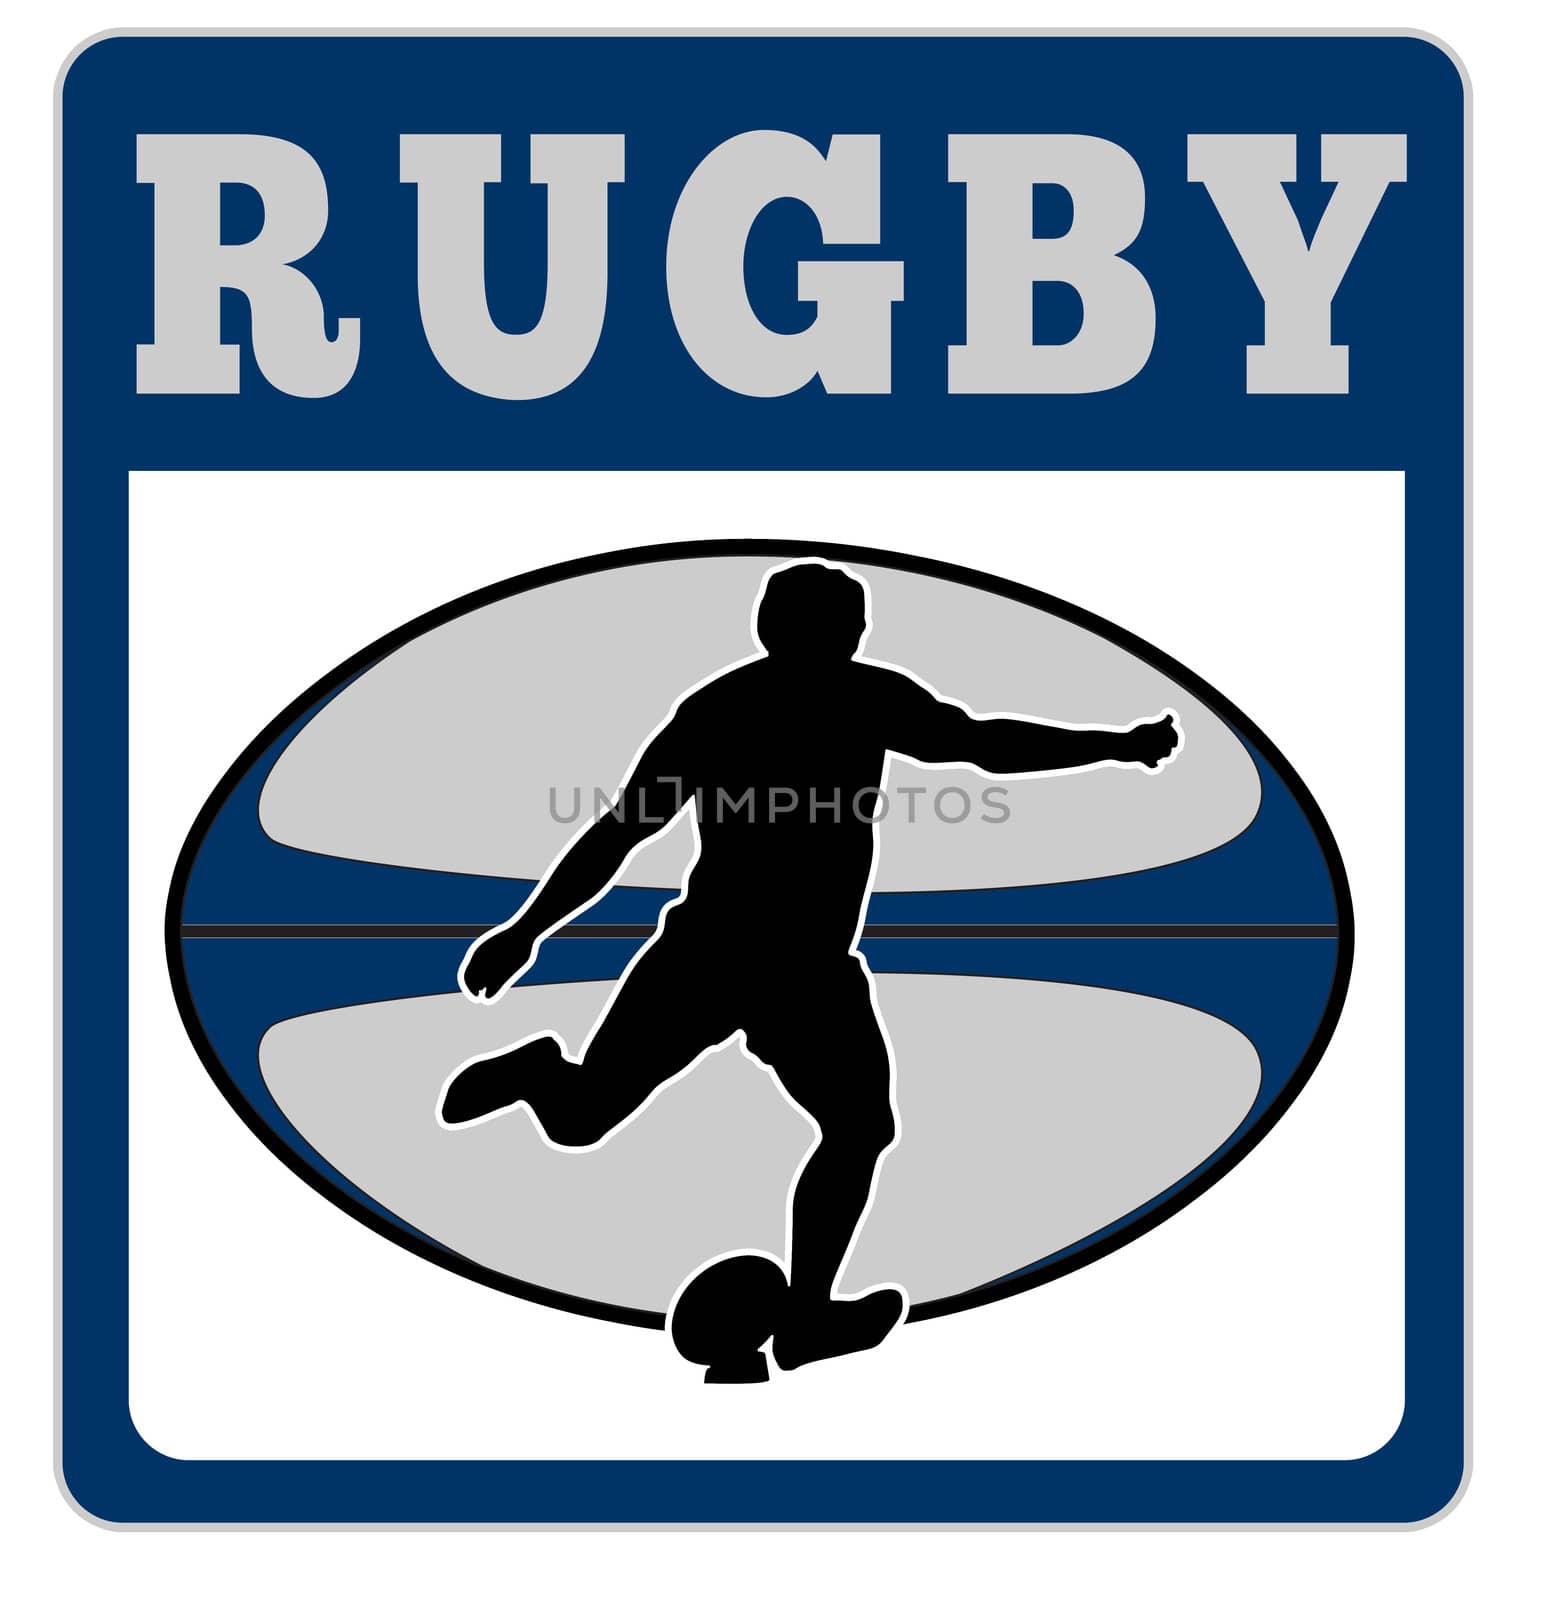 rugby player kicking ball by patrimonio